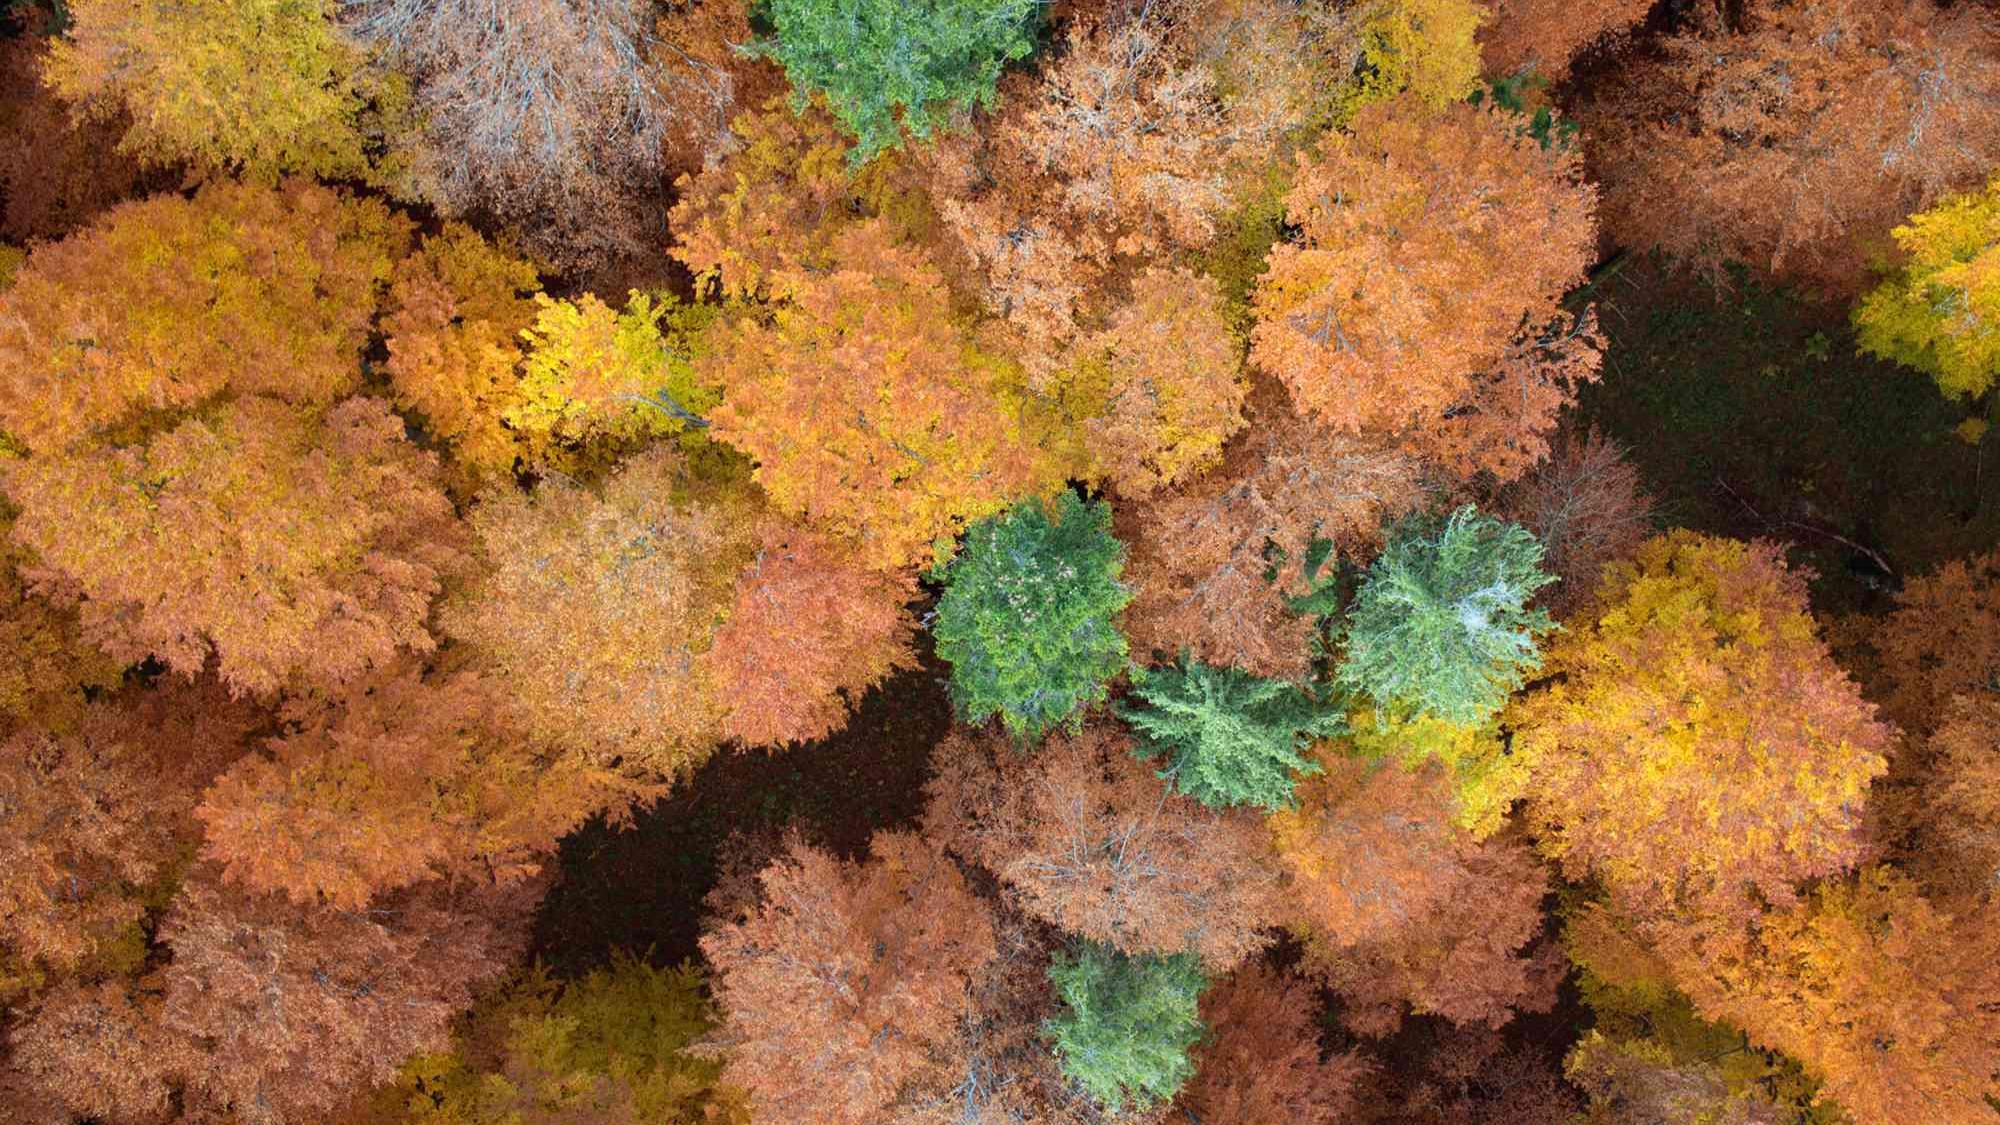 Aerial view of the canopy of an autumn-colored beech forest